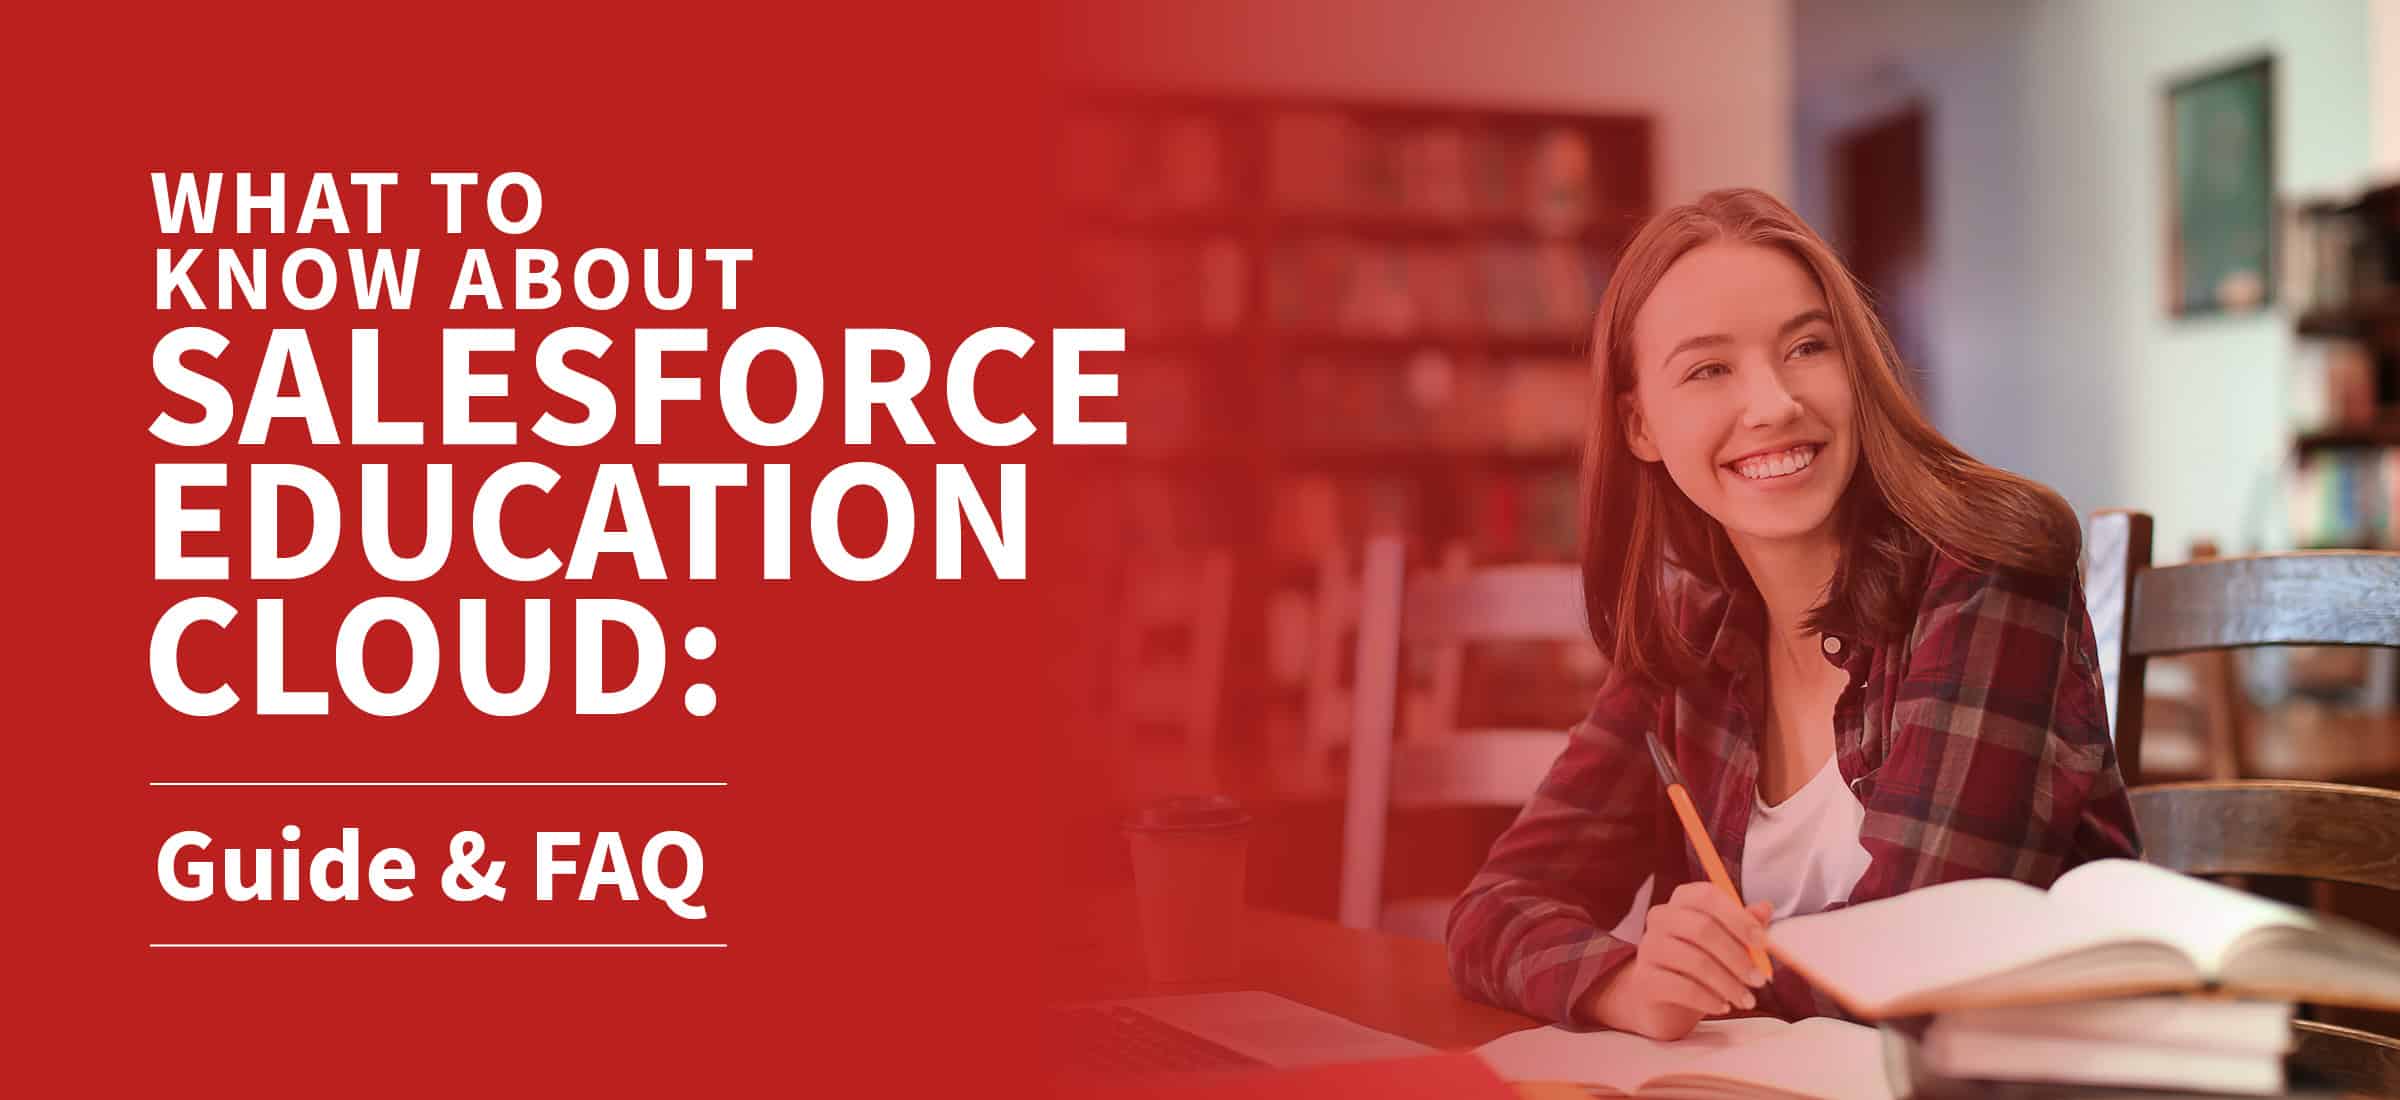 This article explores everything higher education institutions need to know about Salesforce Education Cloud.